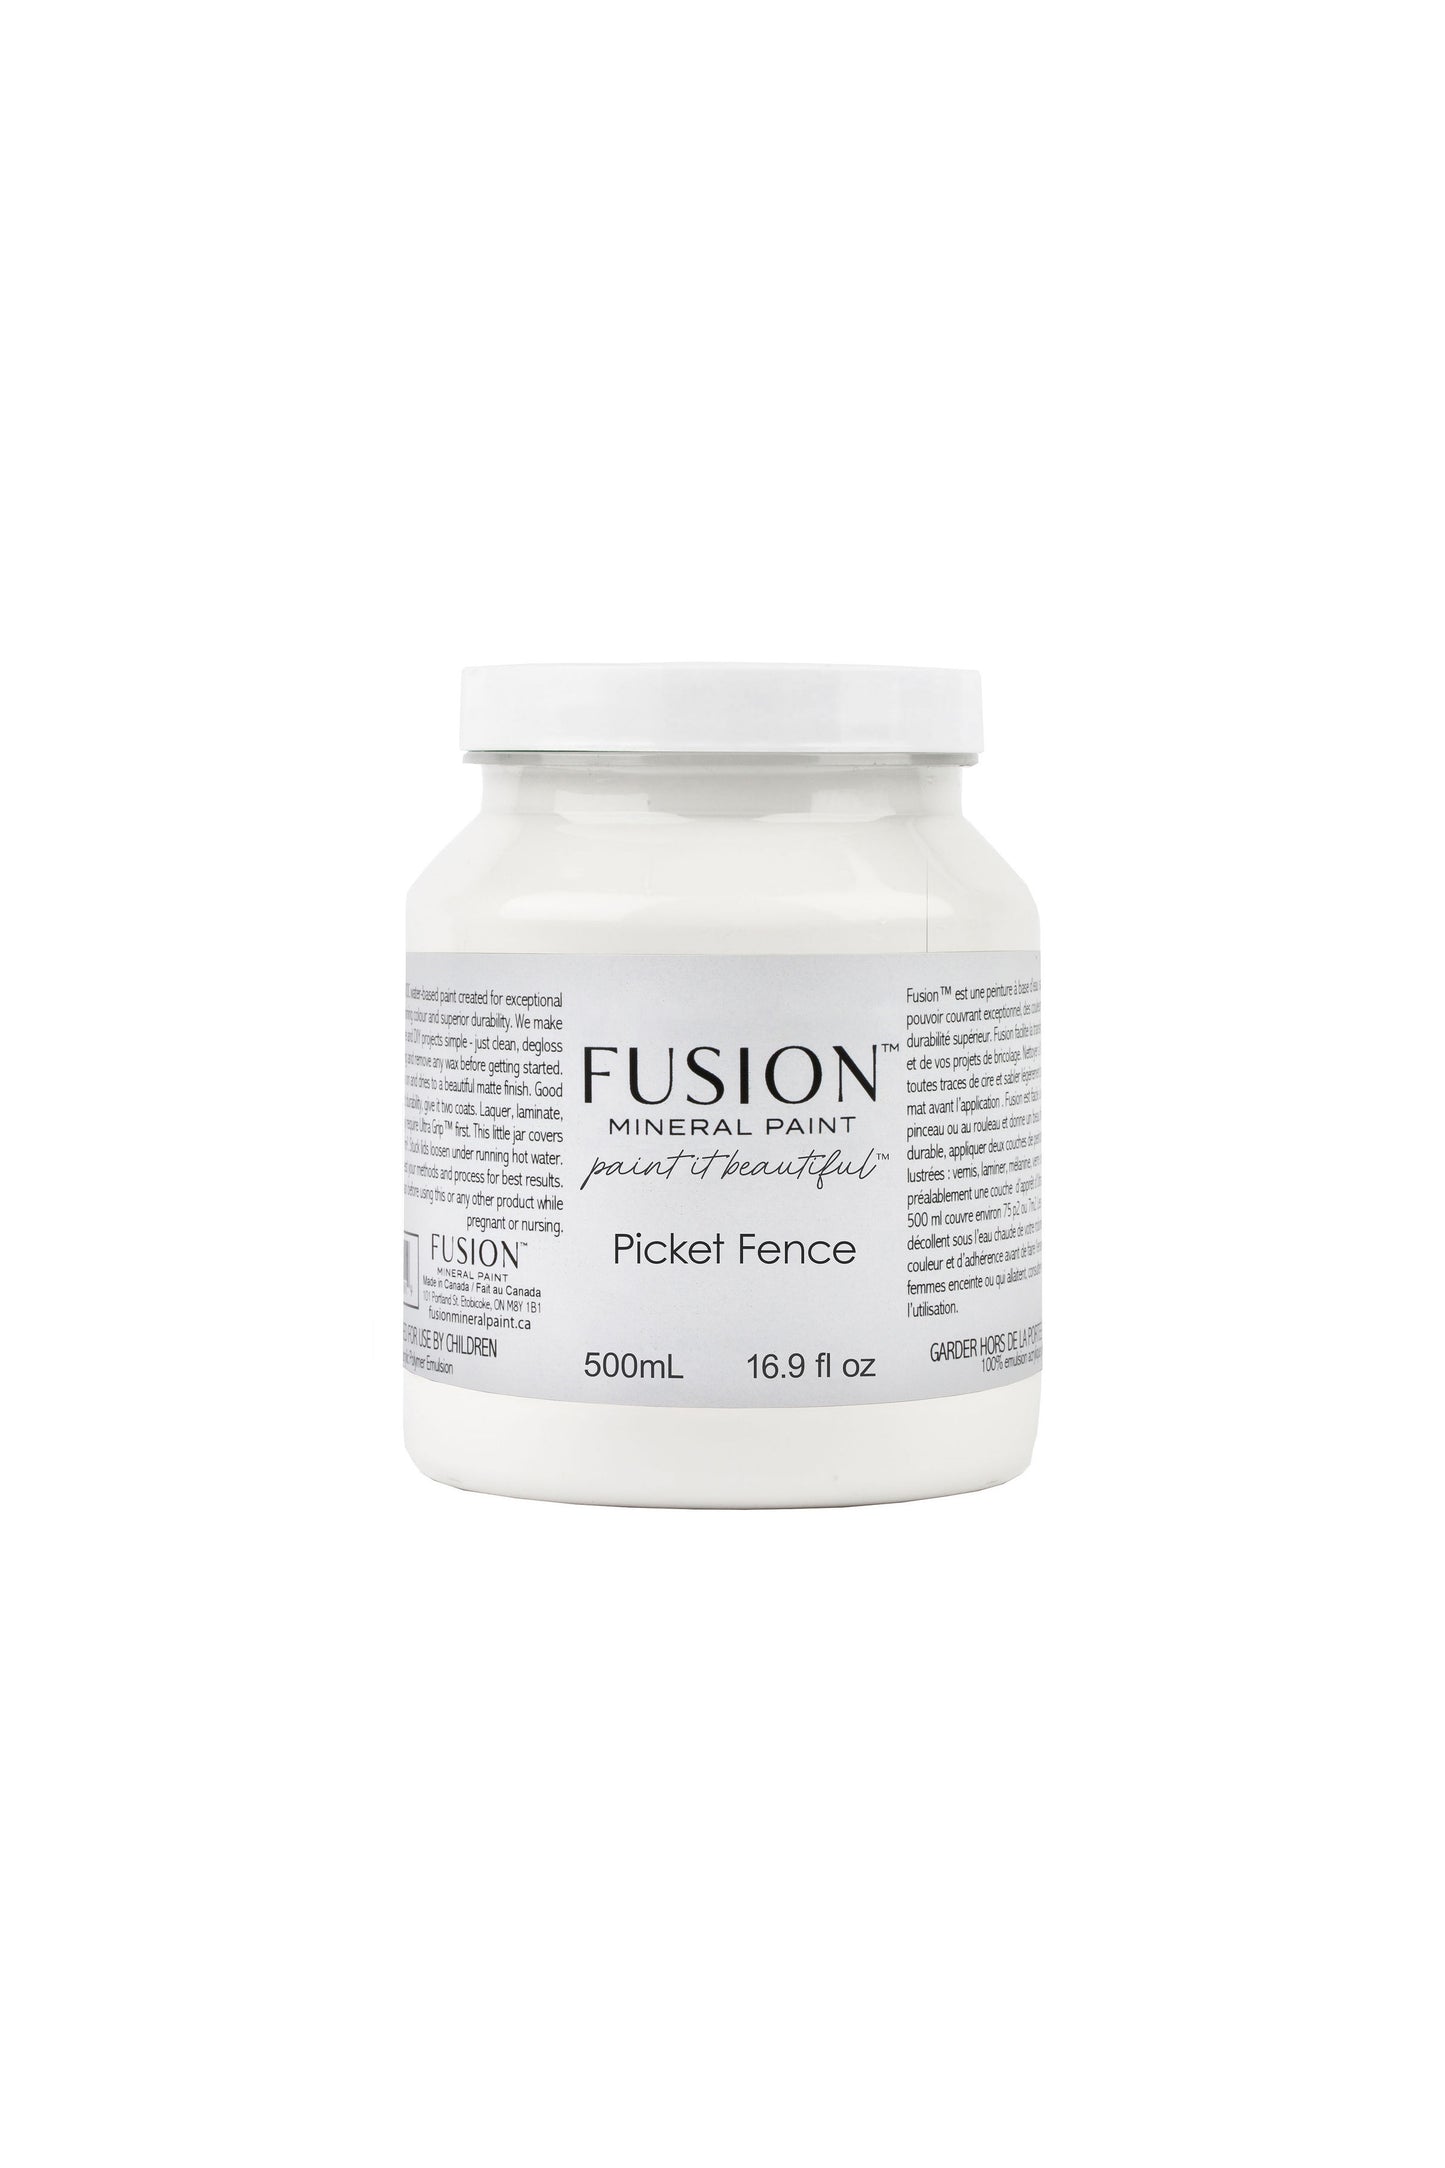 FUSION MINERAL PAINT- Picket Fence